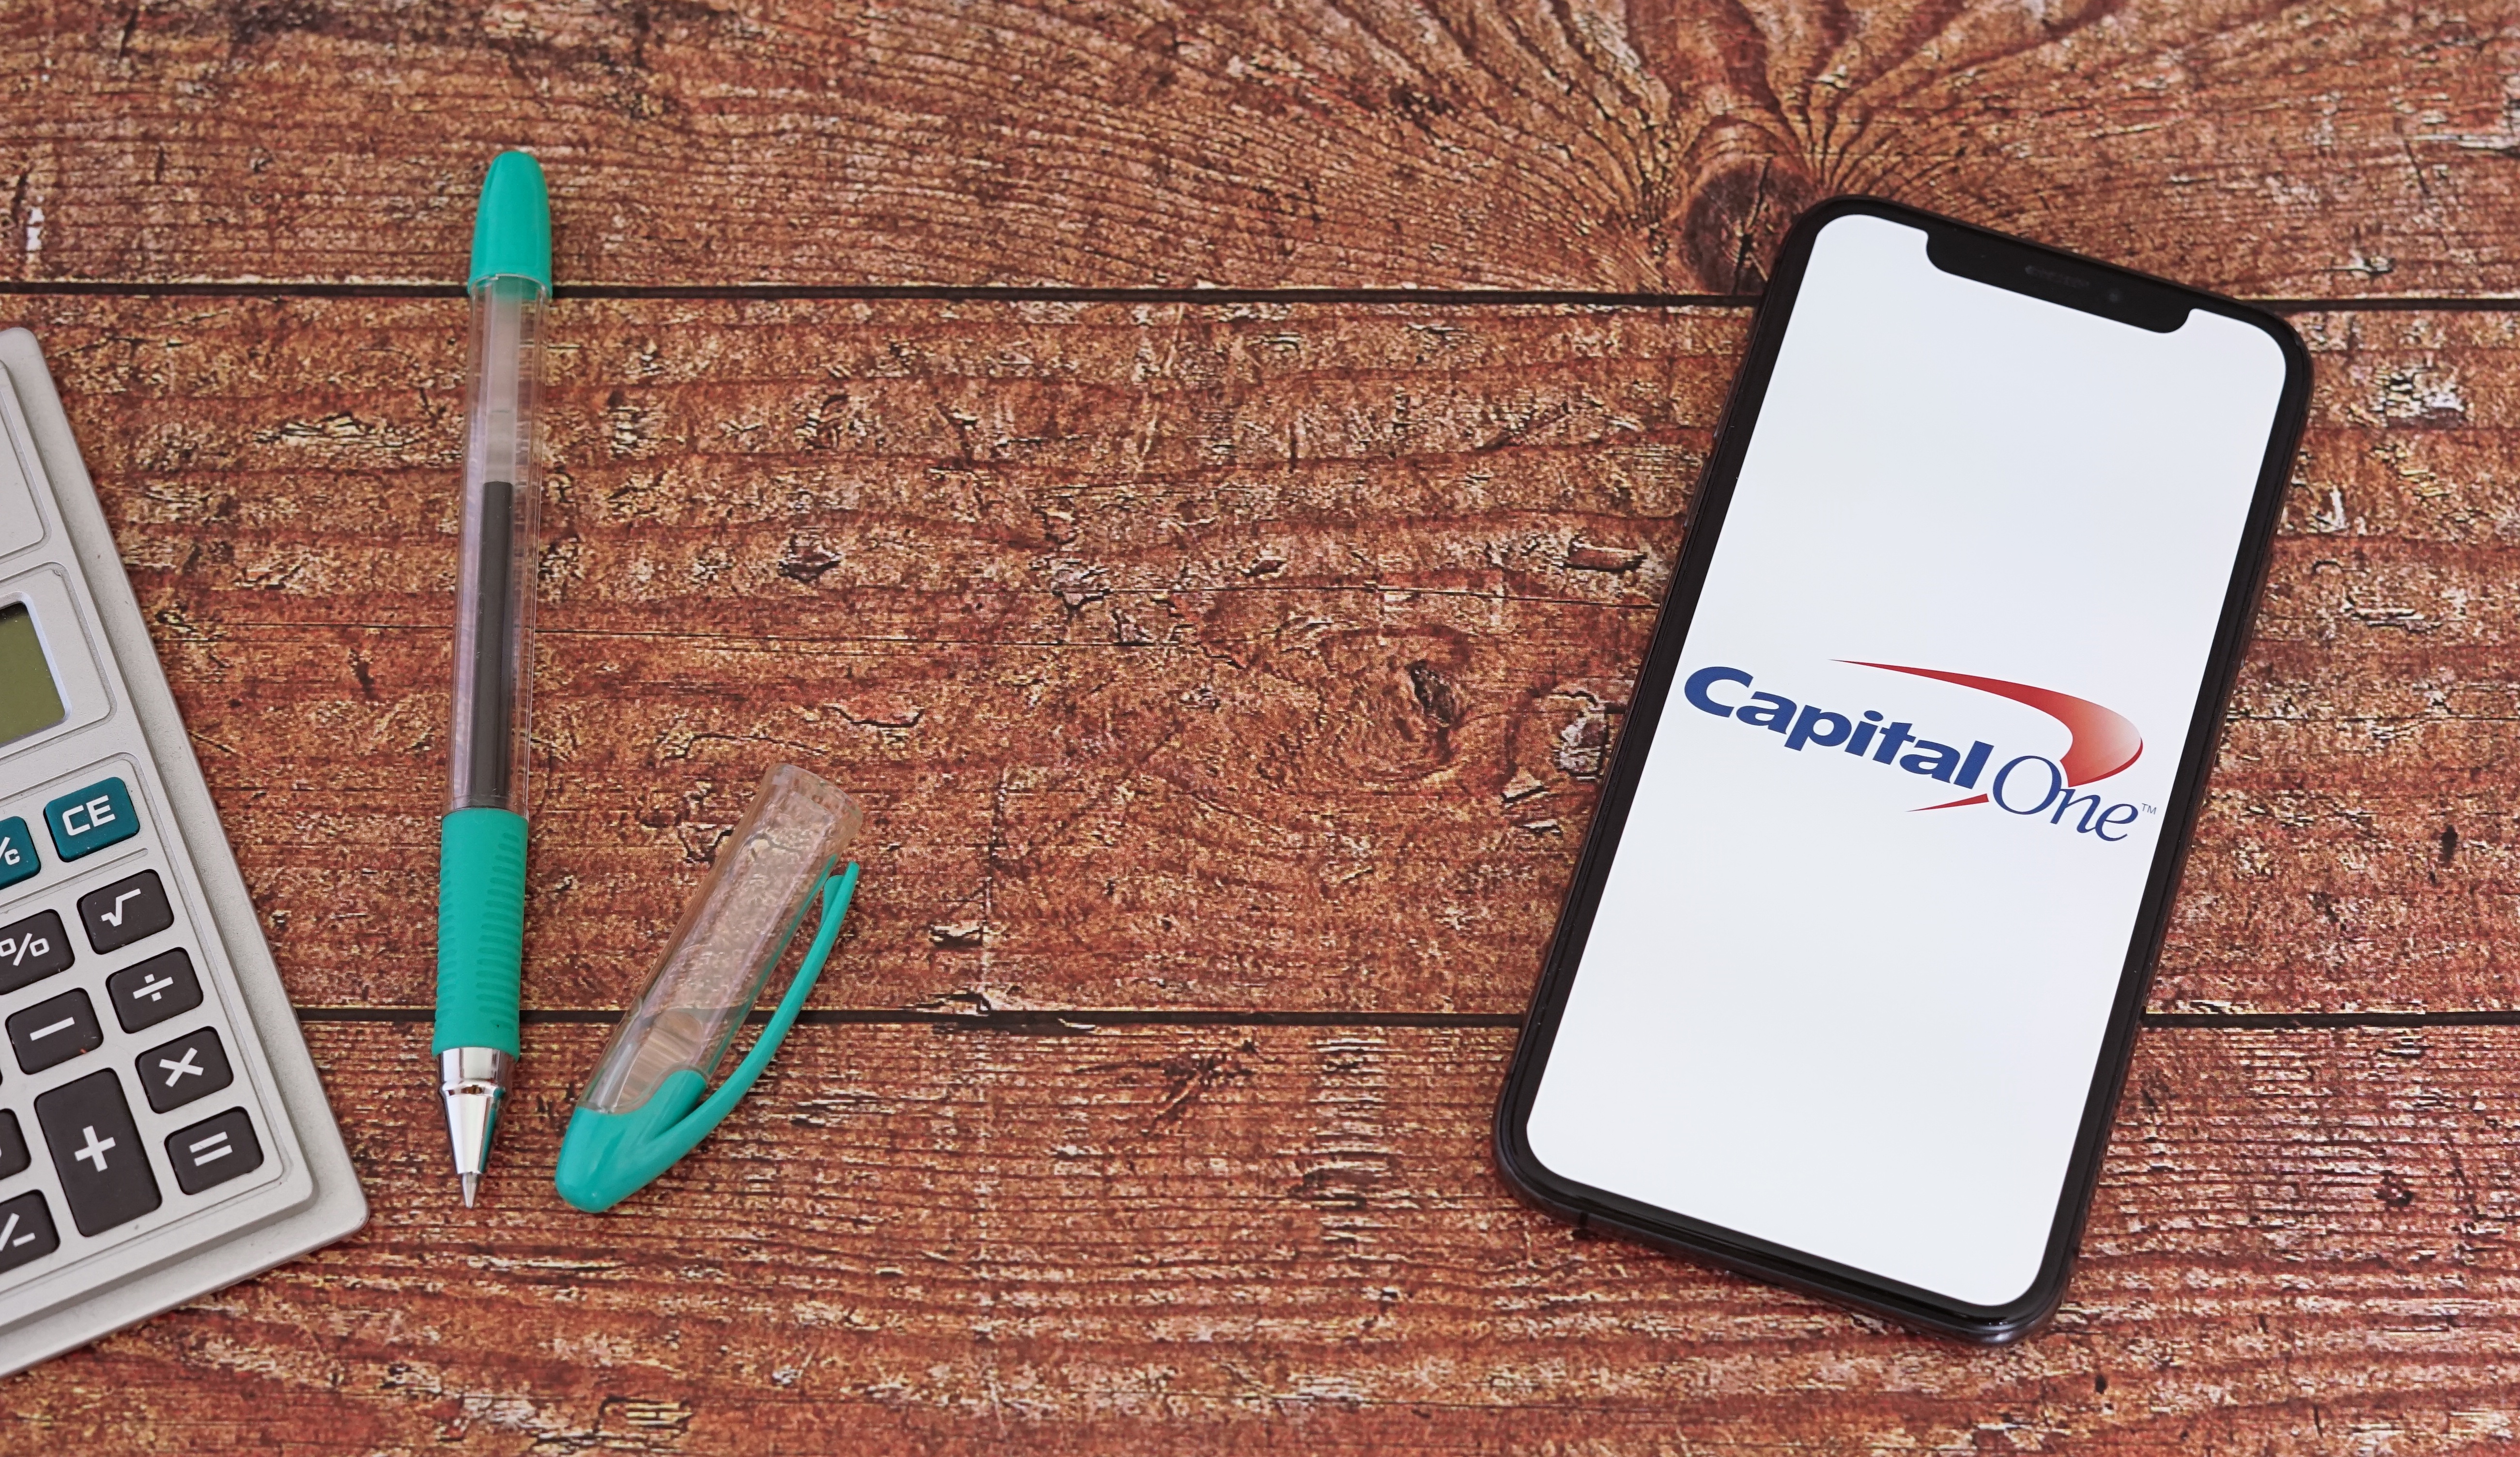 Capital One app review: Everything you need to know